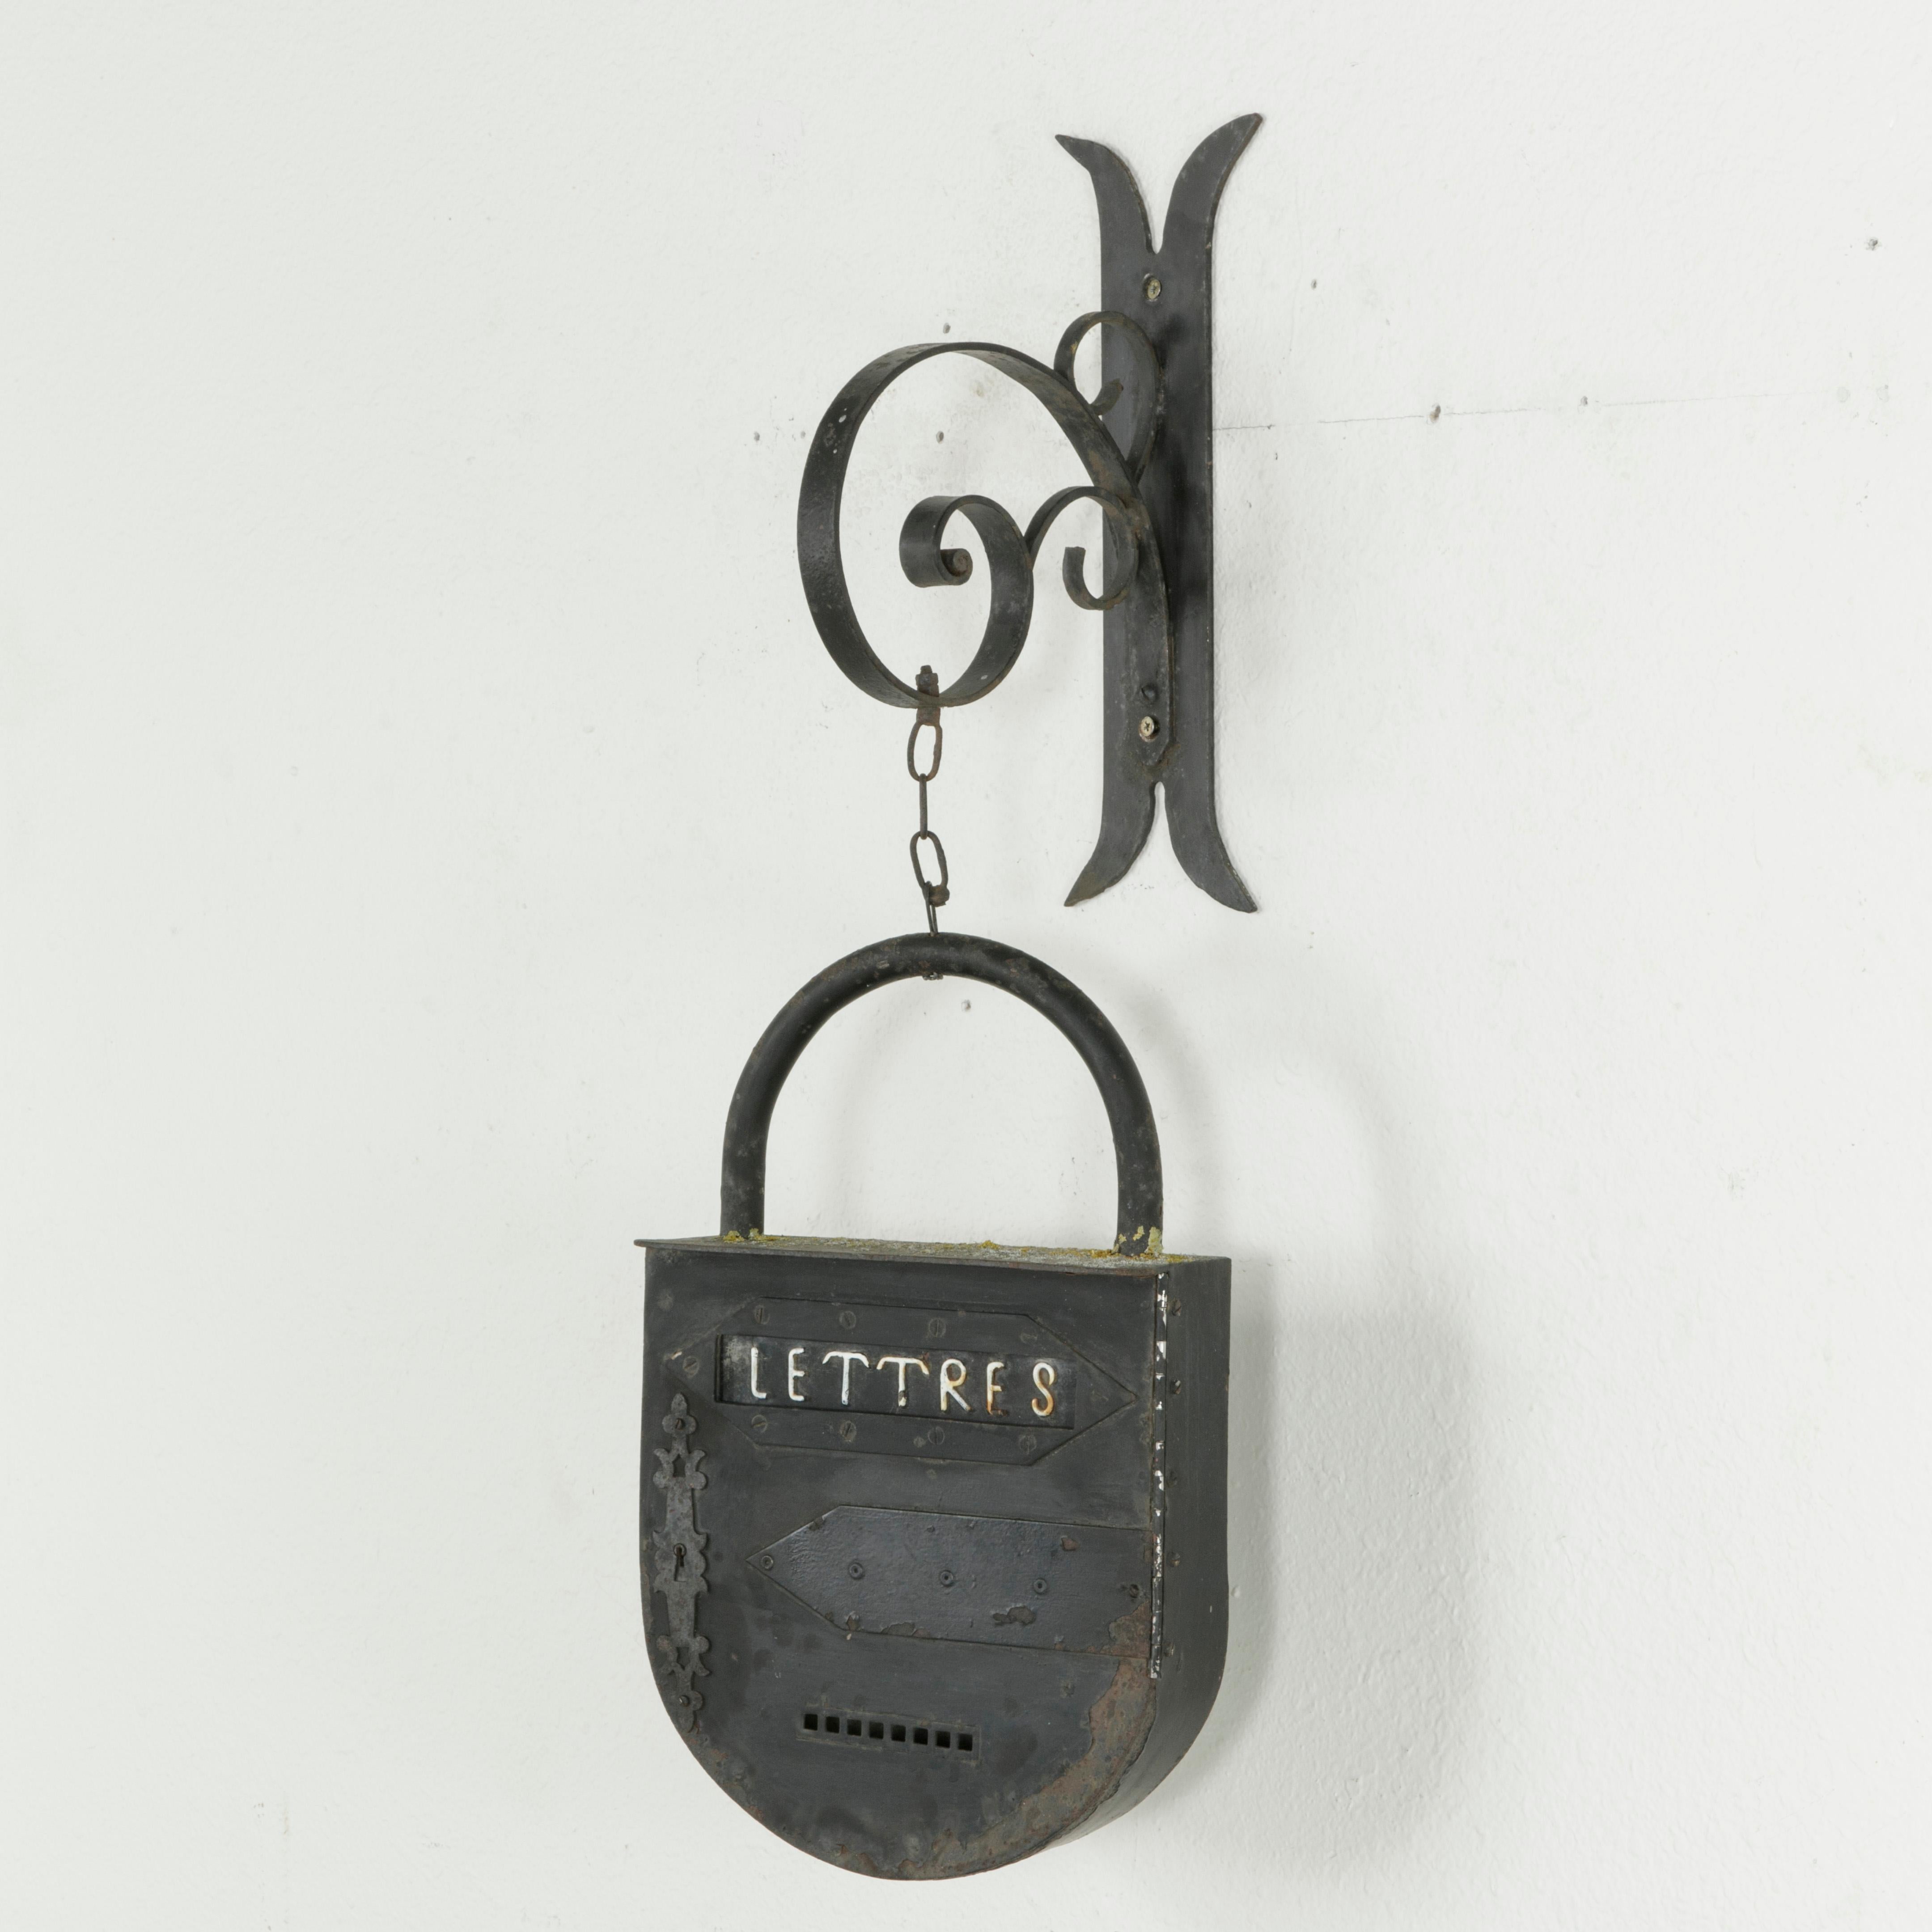 This large mid-20th century French iron padlock is marked Lettres in white or Letters and was once used as a mailbox. Hanging from a hand forged iron bracket, this piece now serves as a decorative object.